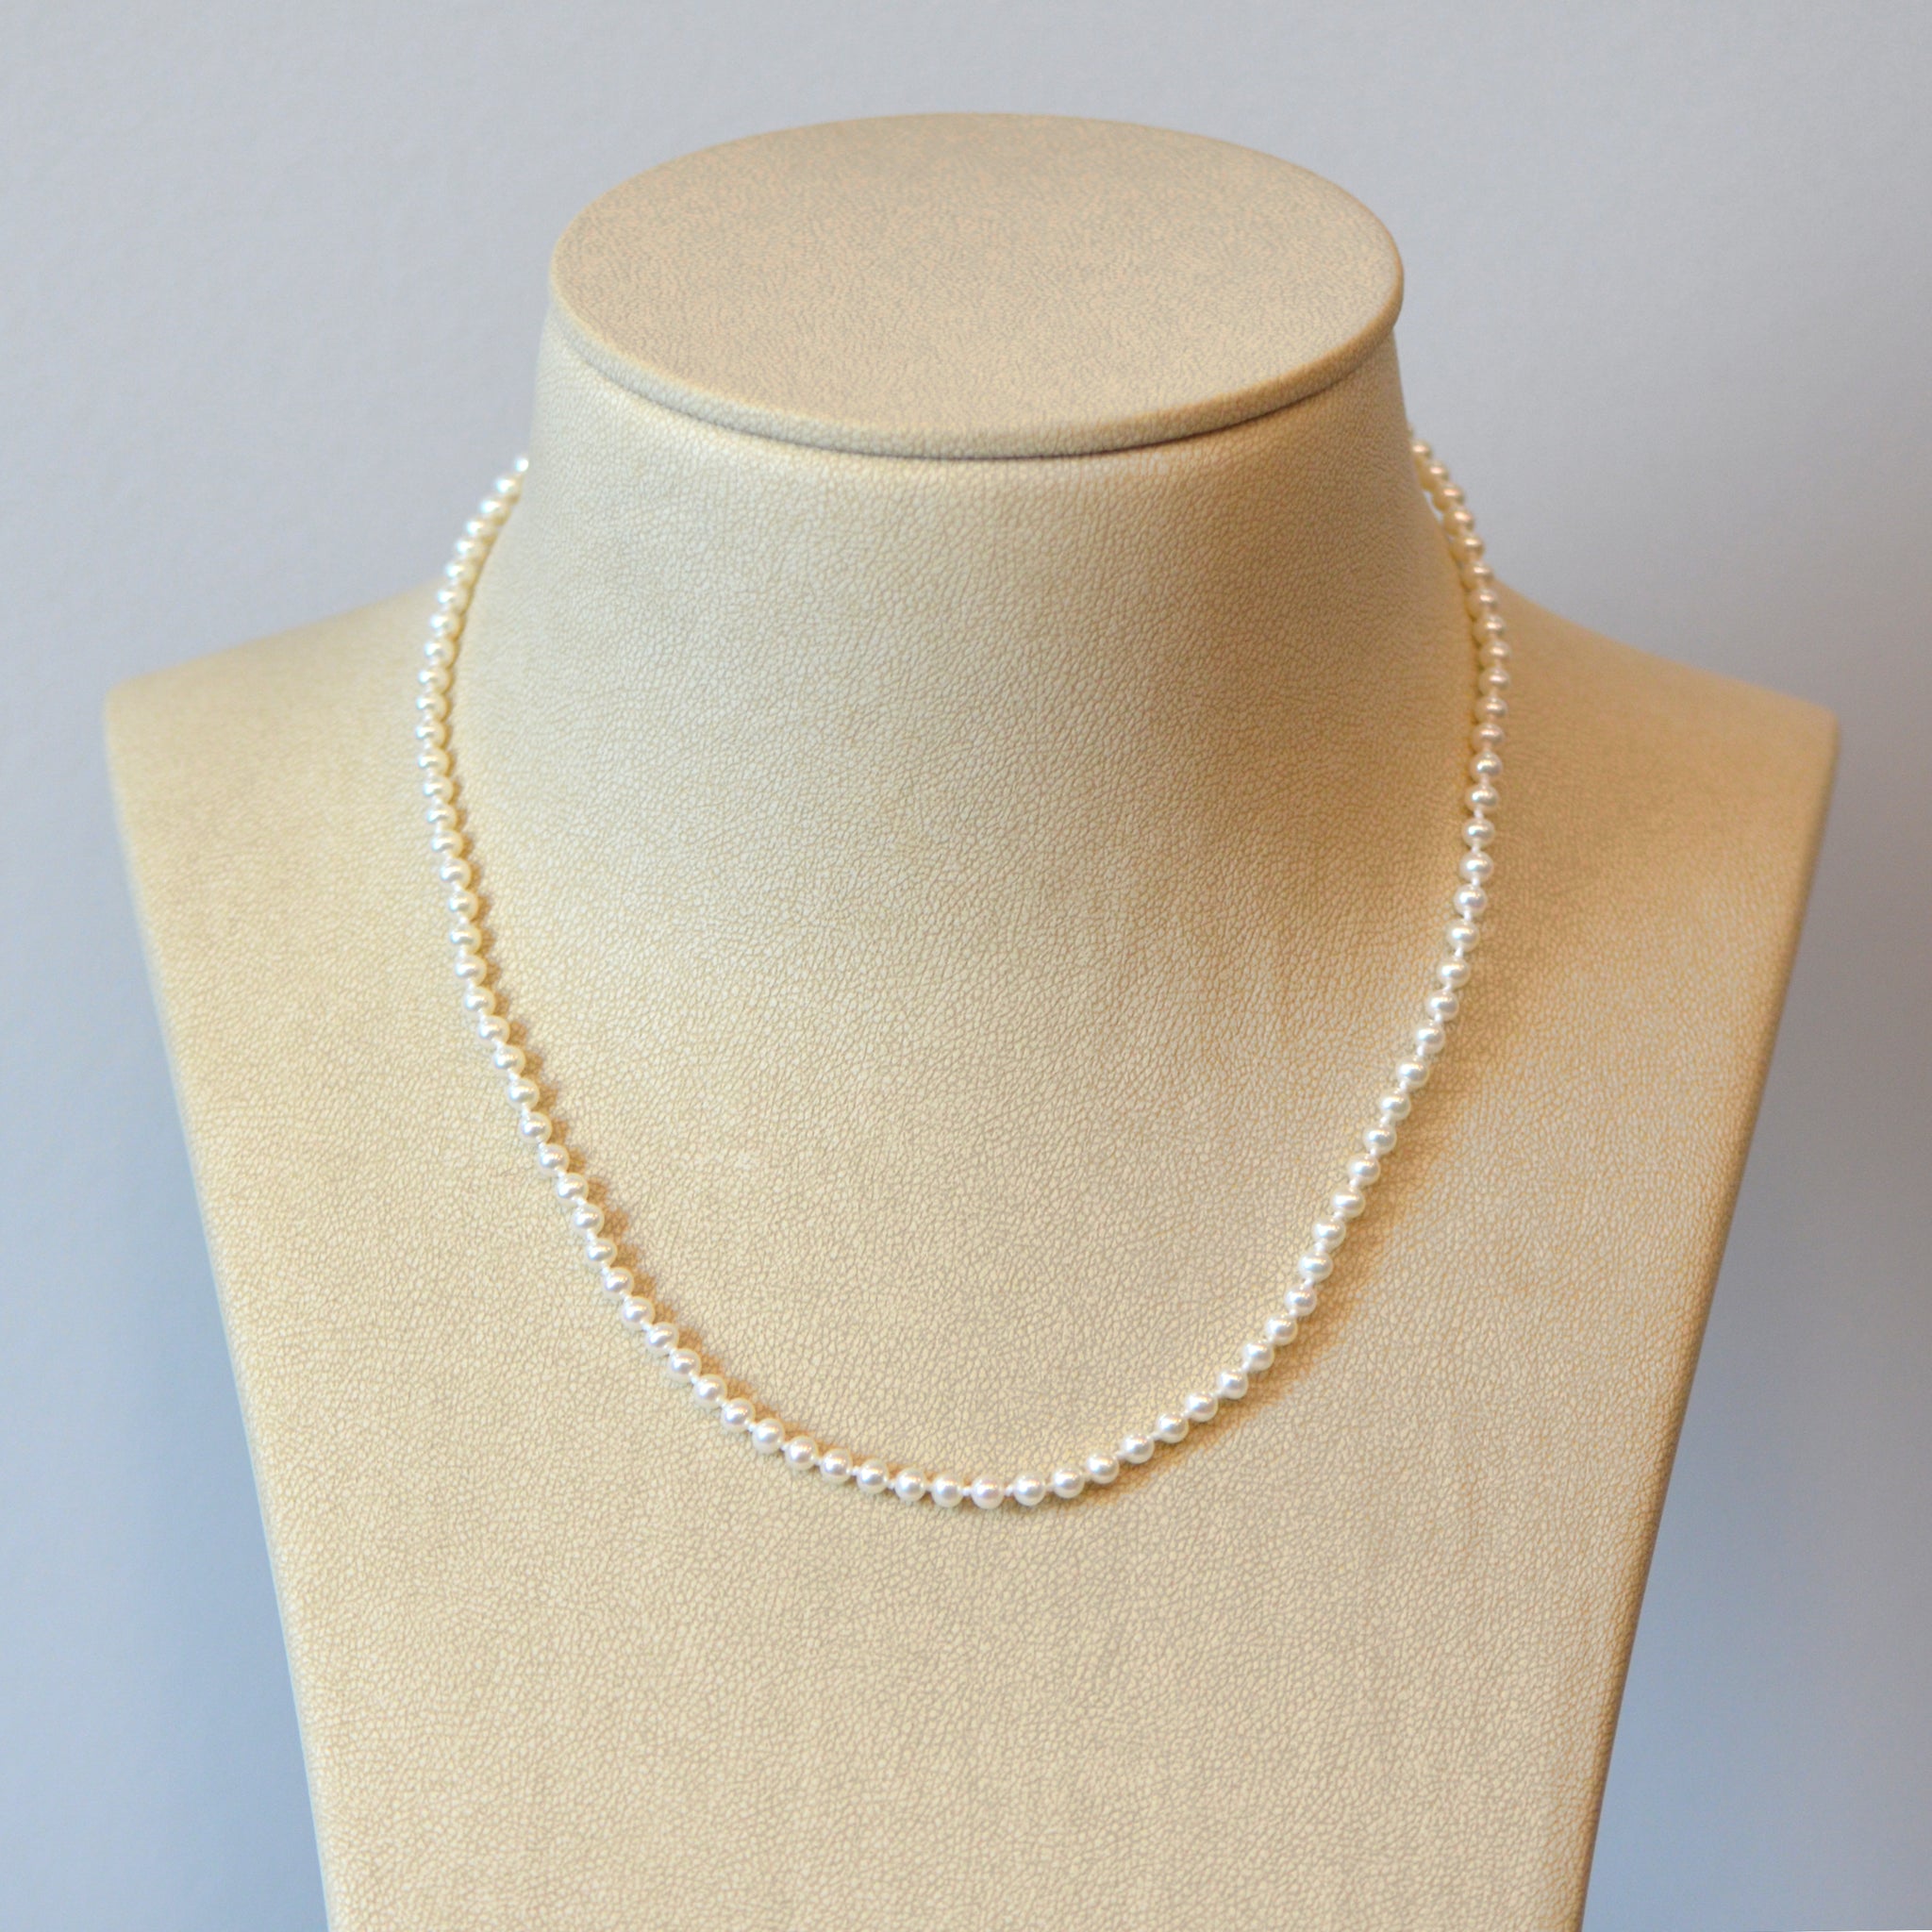 Freshwater Pearl Necklace with 14K White Gold Clasp - Judith Arnell ...